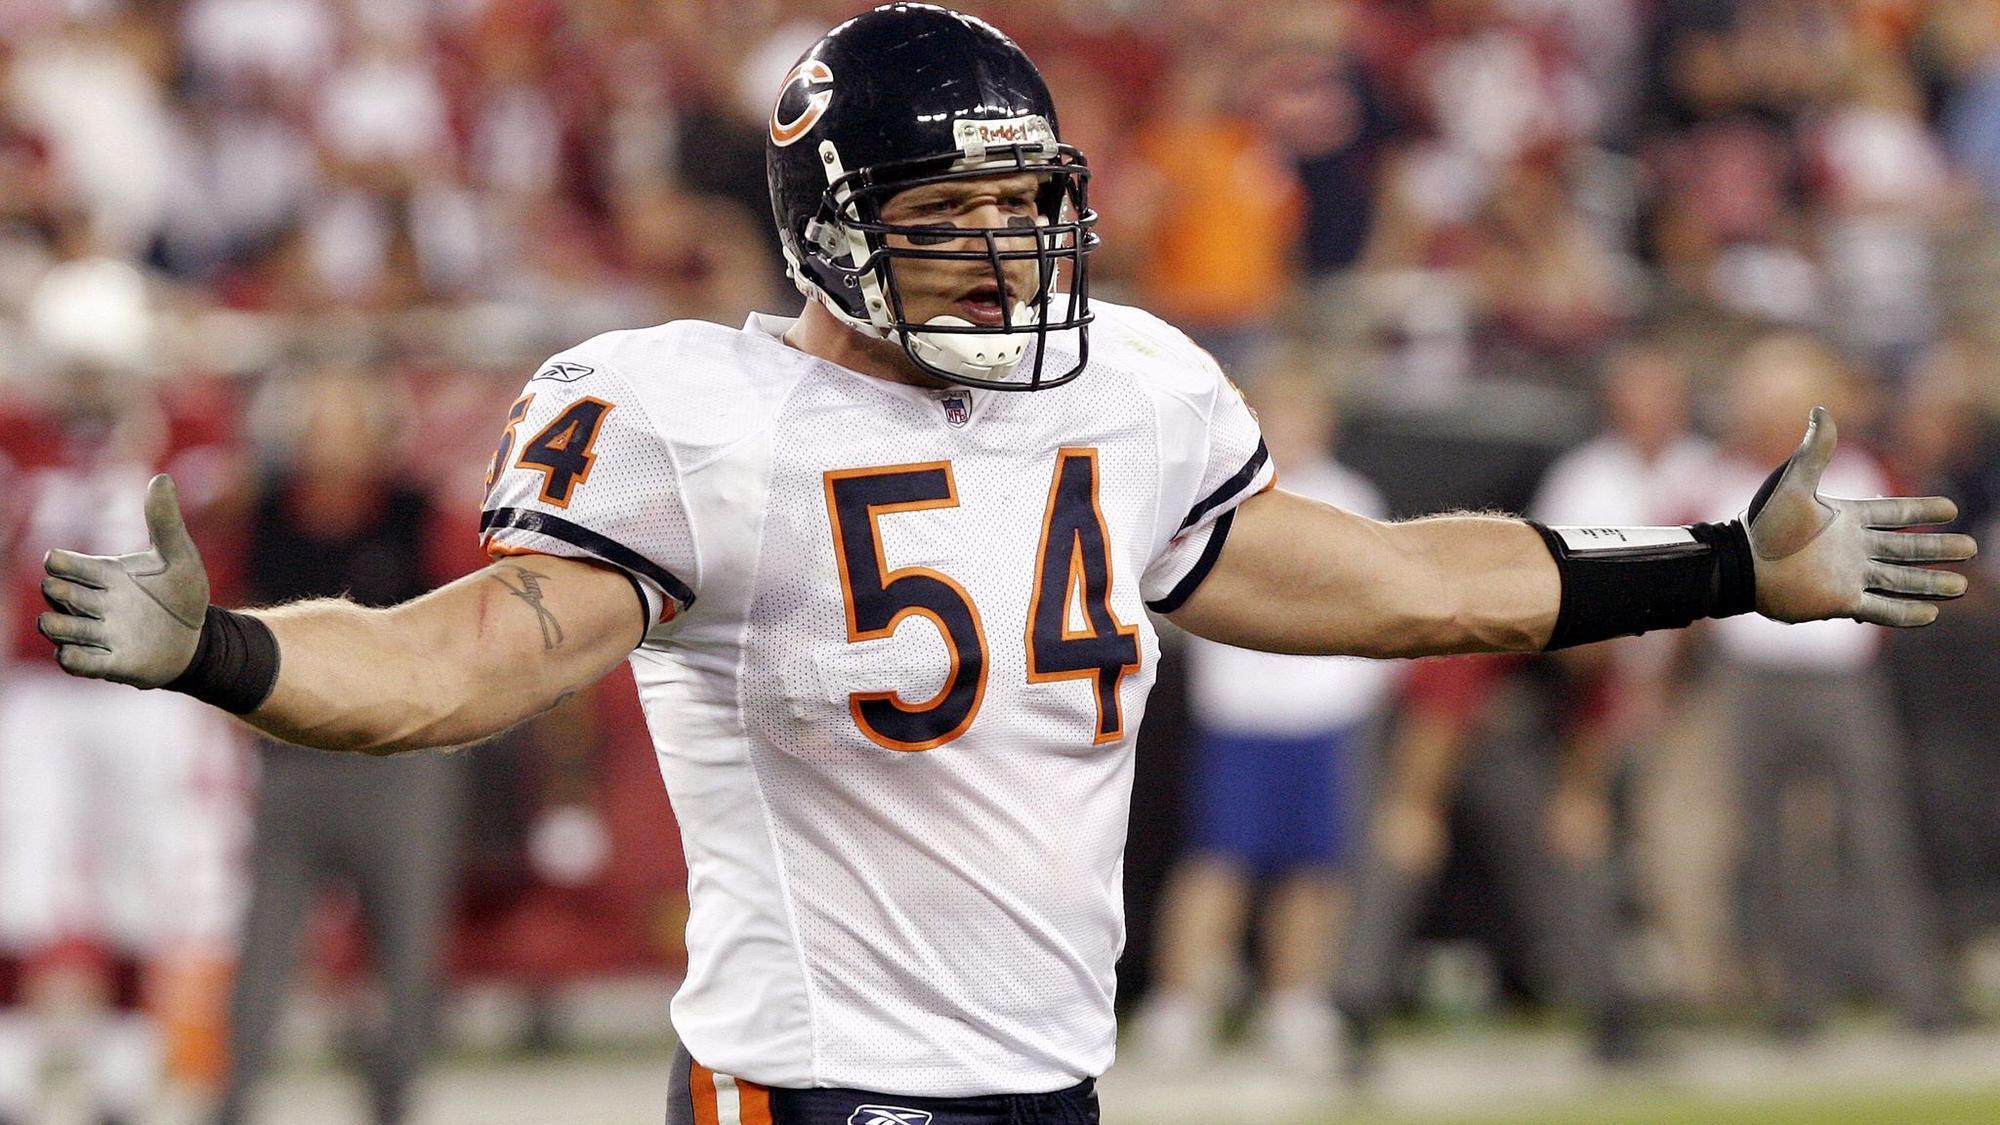 Brian Urlacher named semifinalist for Pro Football Hall of Fame - Chicago Tribune